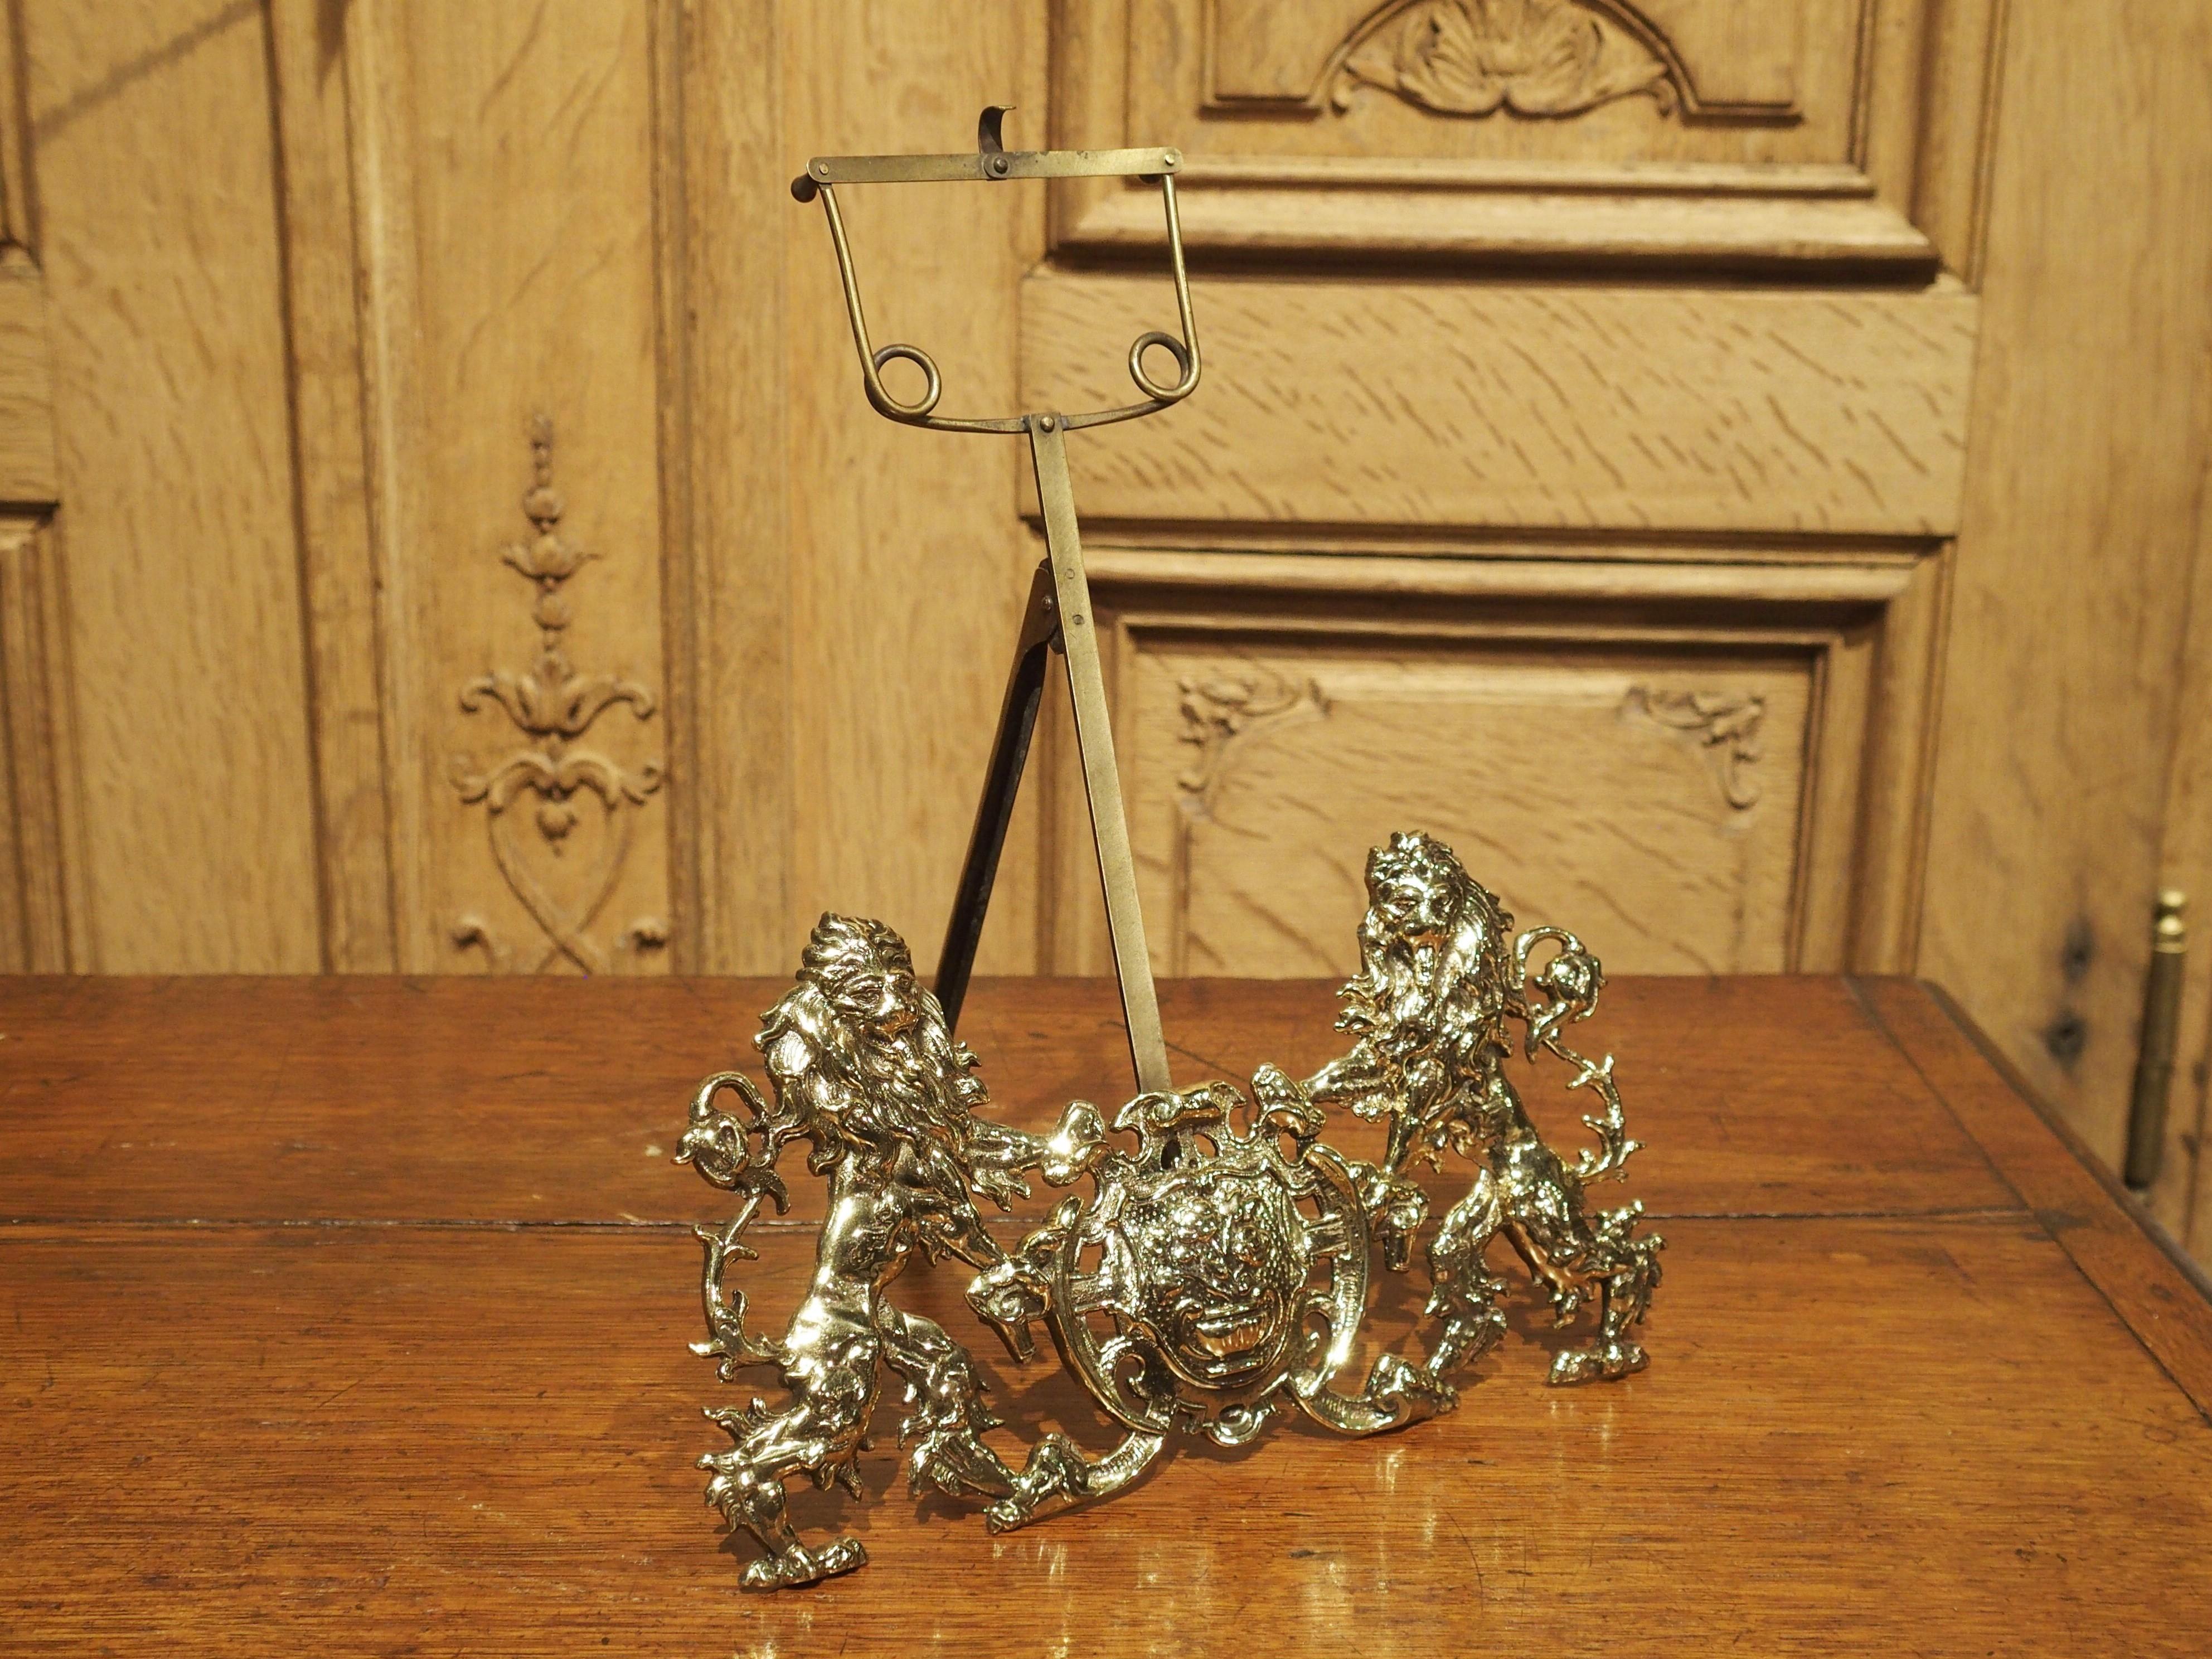 This decorative coat of arms music sheet holder is made from lightly gilt bronze and brass and was produced circa 1870.

Supported by an easel stand, our antique music sheet holder shows a heraldic coat of arms. Two lion supporters are holding up